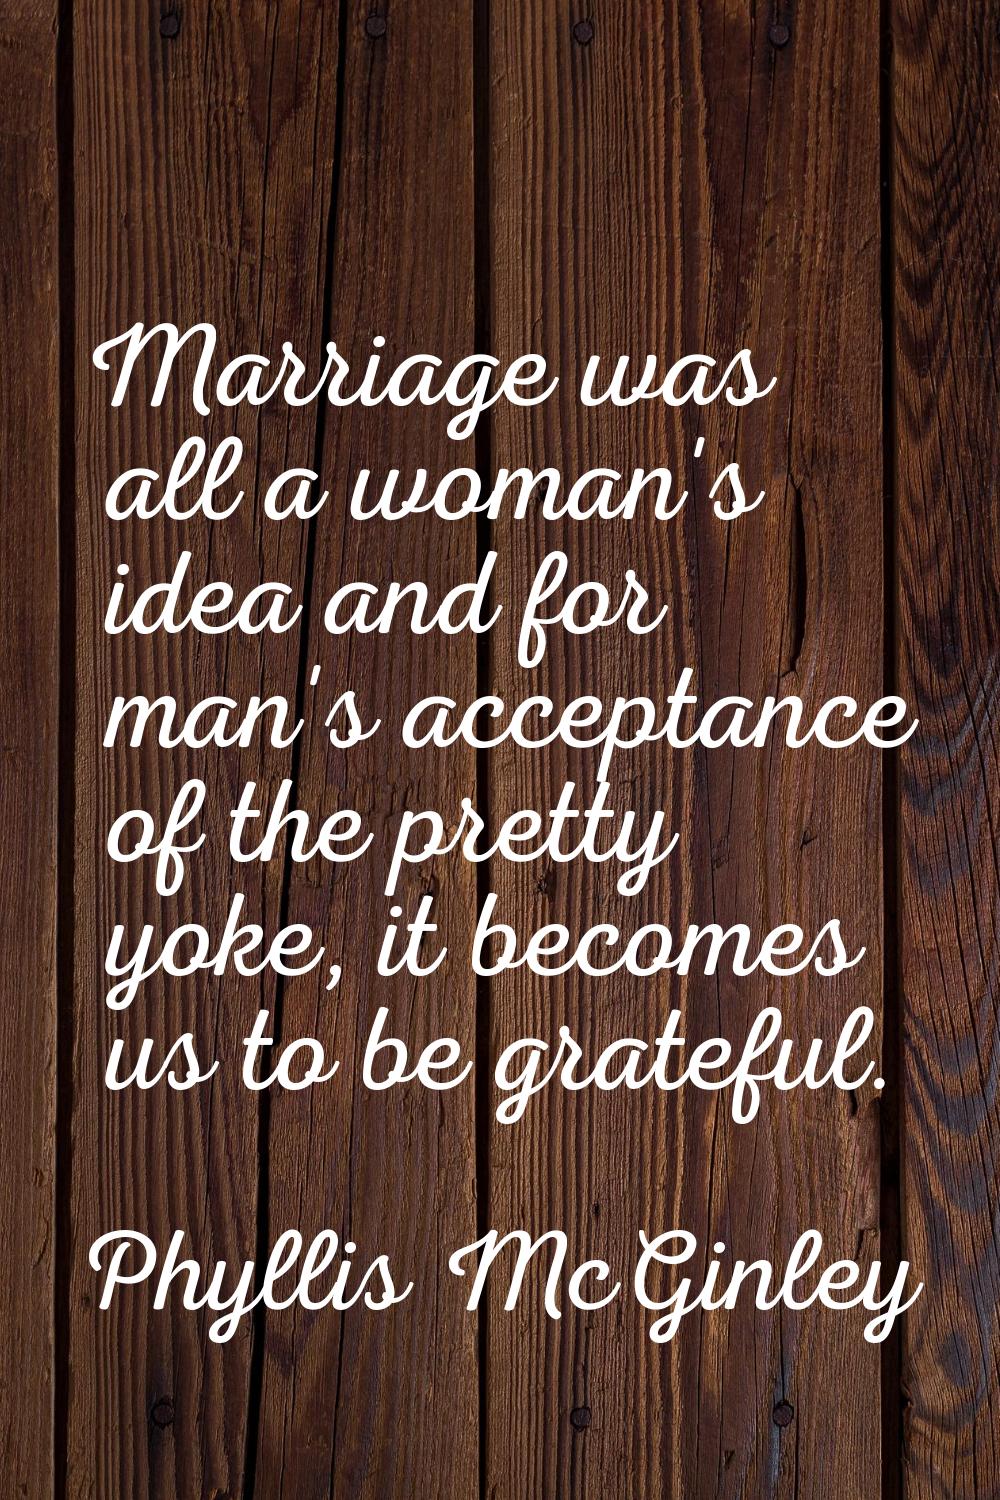 Marriage was all a woman's idea and for man's acceptance of the pretty yoke, it becomes us to be gr